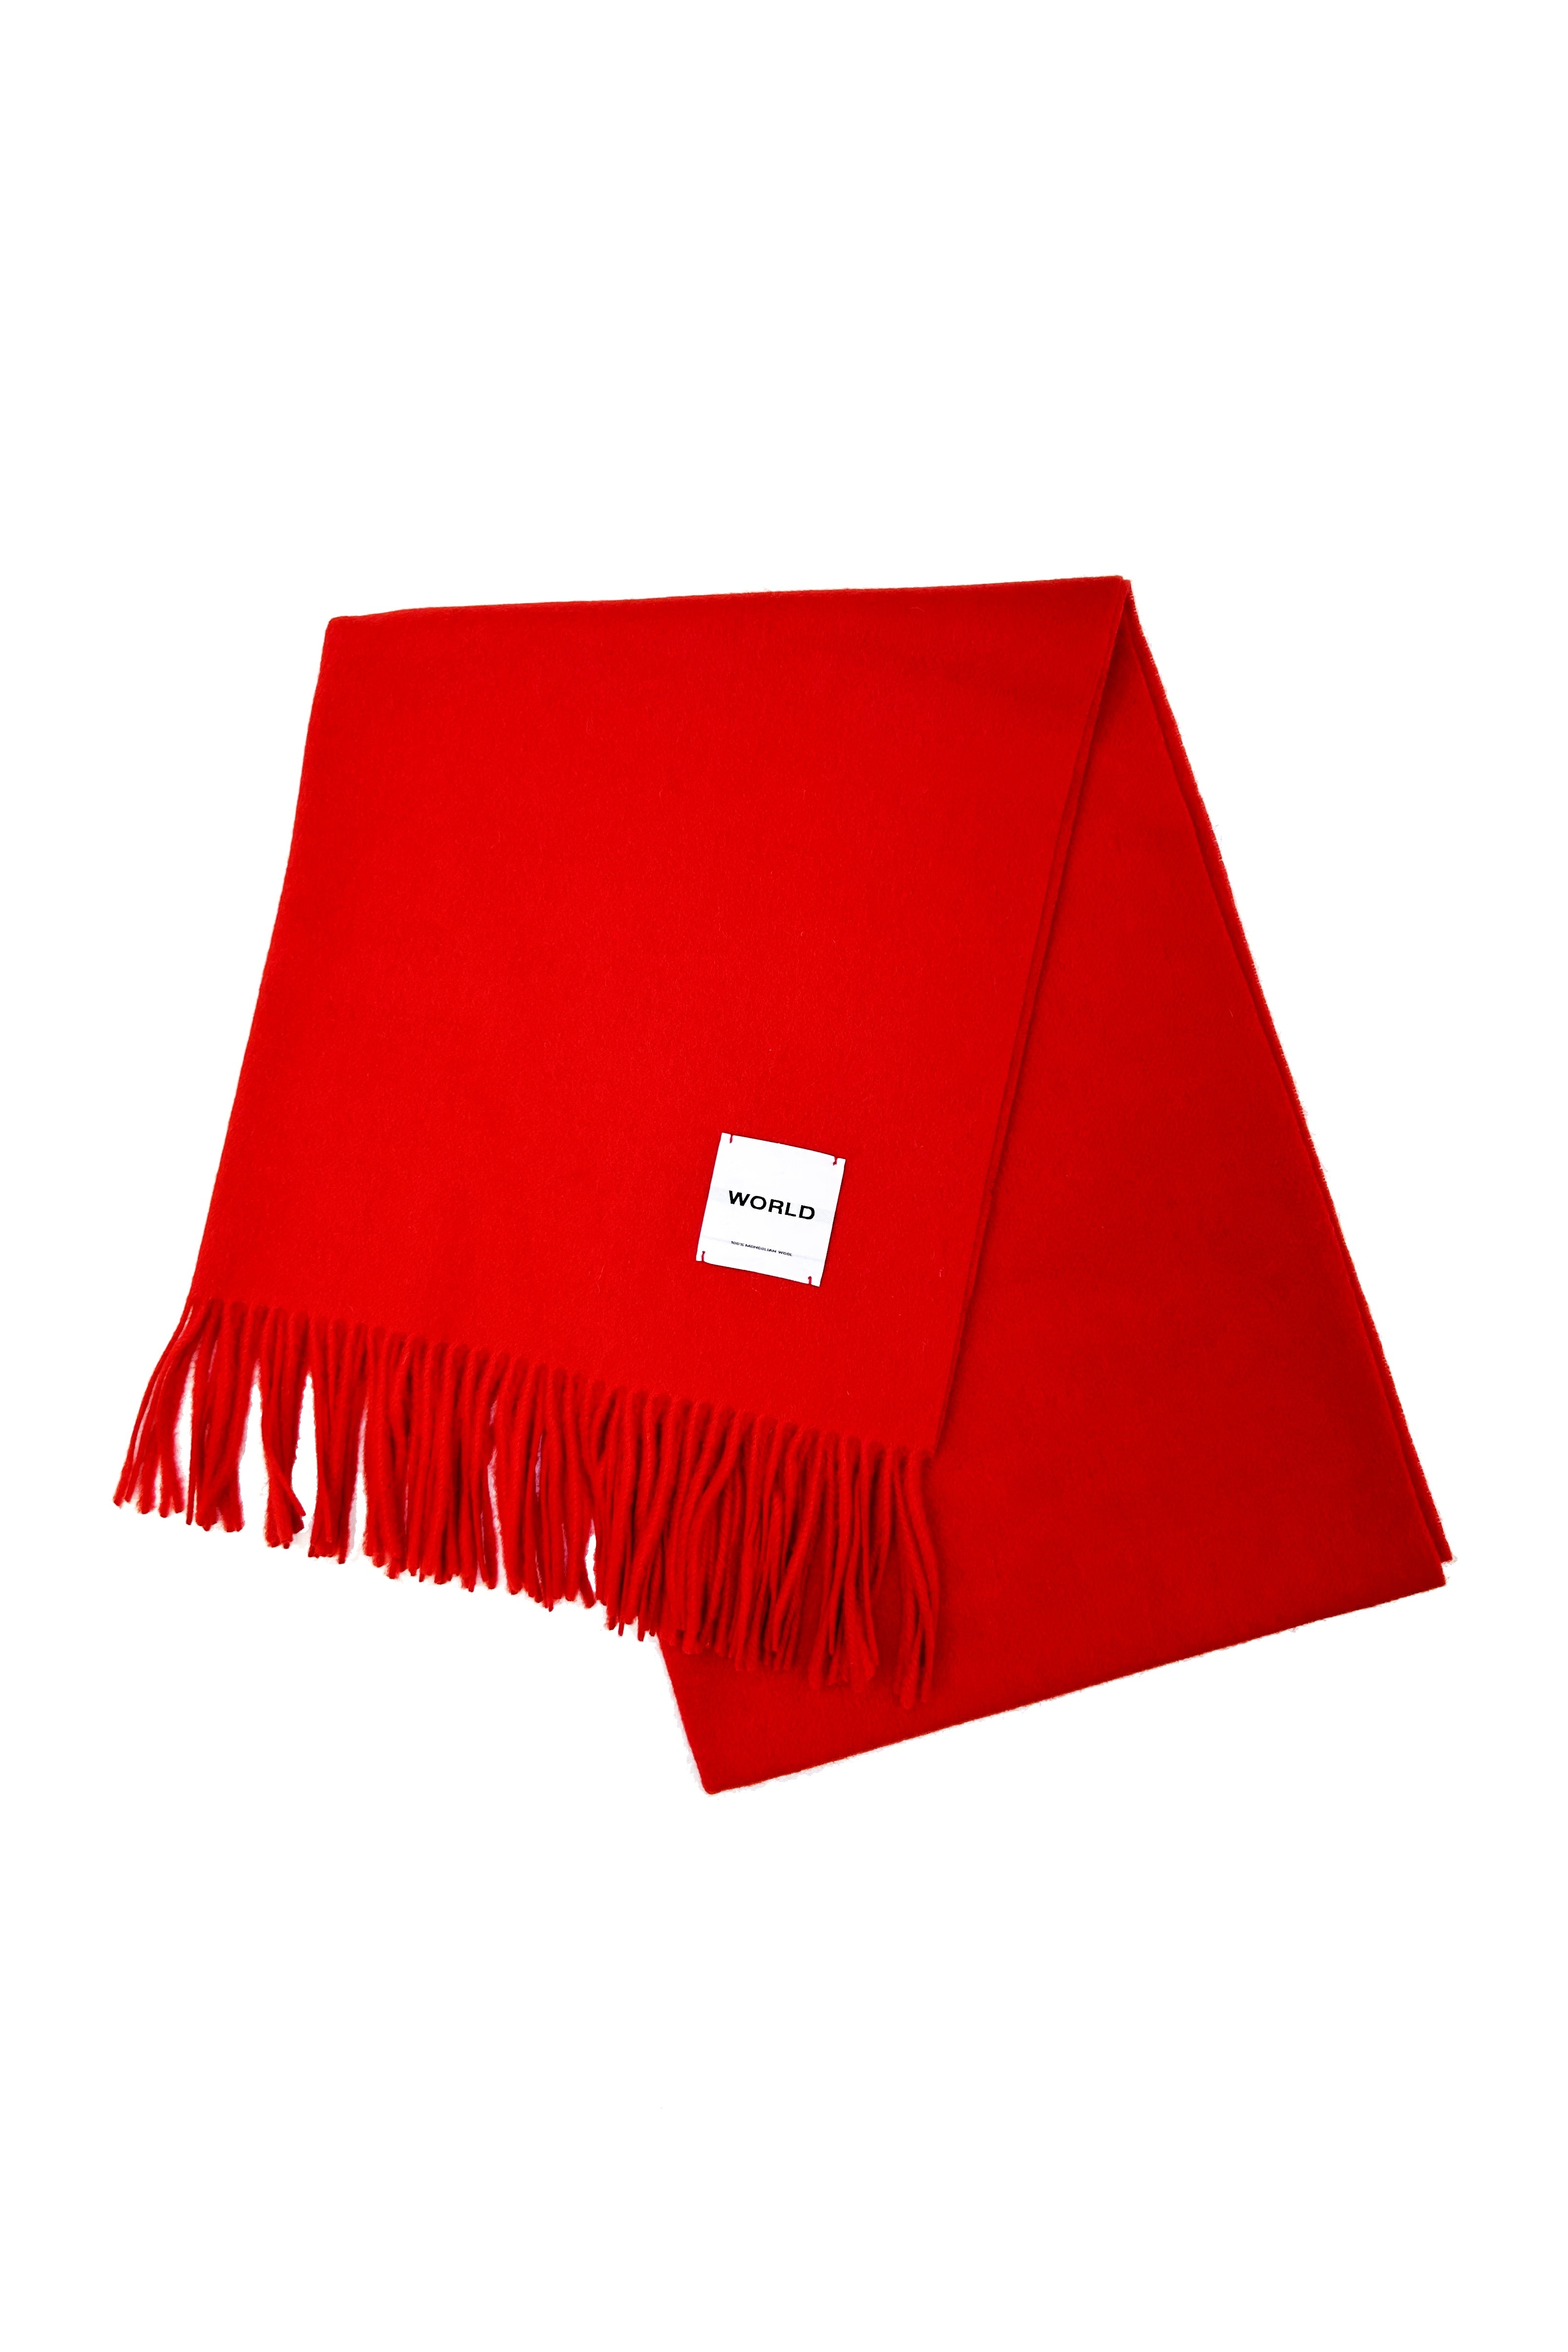 WORLD Mongolian Wool Scarf/Wrap 200x70cm - Tomato Red - Dry Clean Only